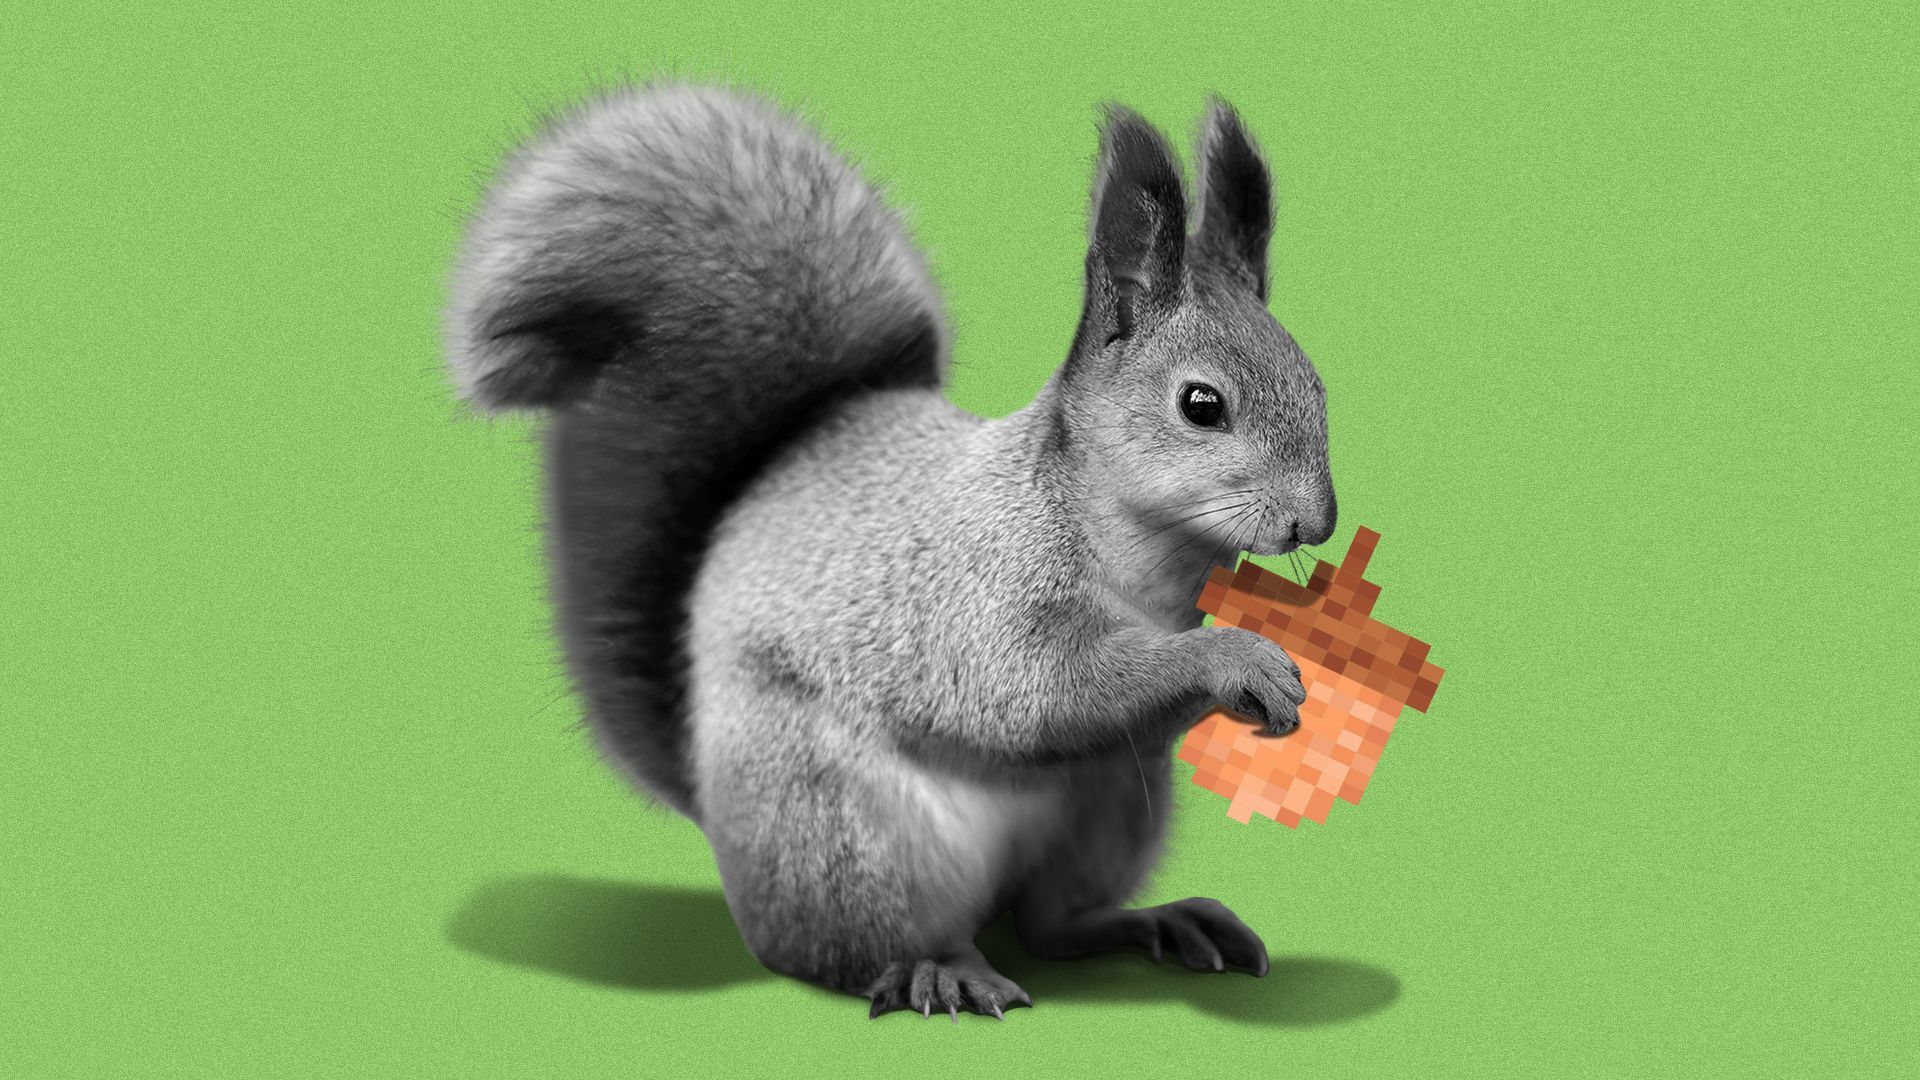 Illustration of a squirrel holding a pixelated acorn.